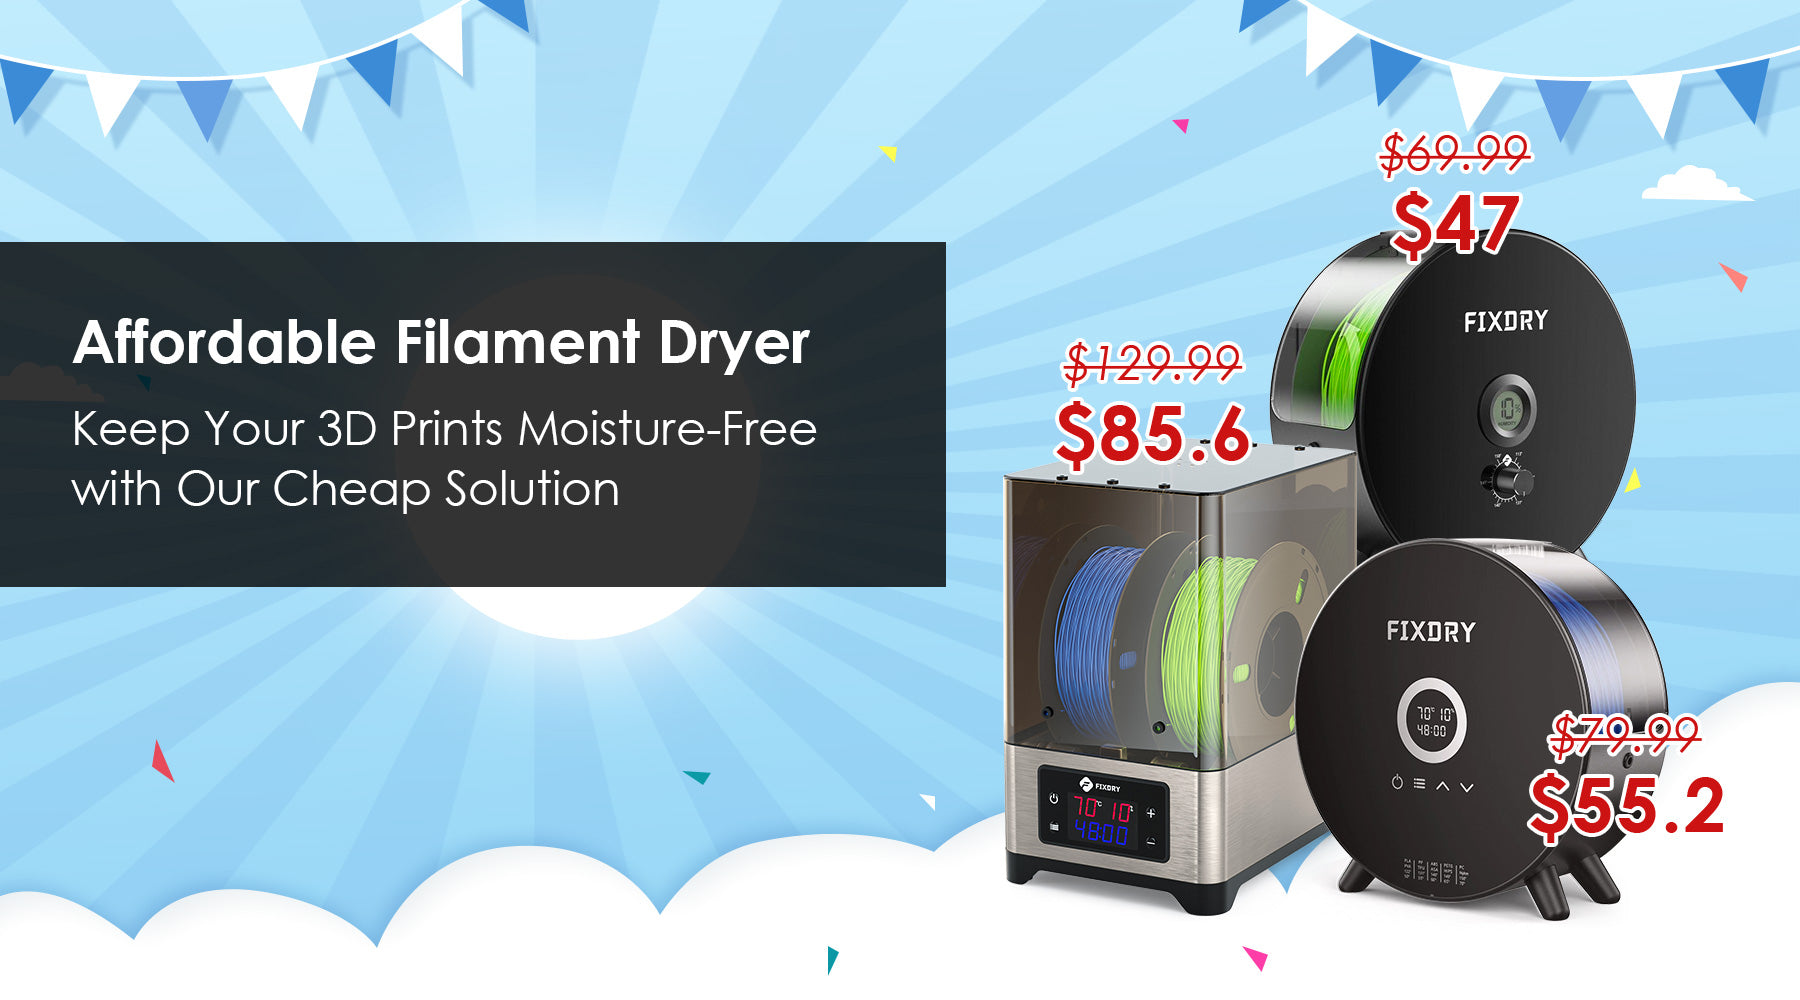 Affordable Filament Dryer: Keep Your 3D Prints Moisture-Free with Our Cheap Solution